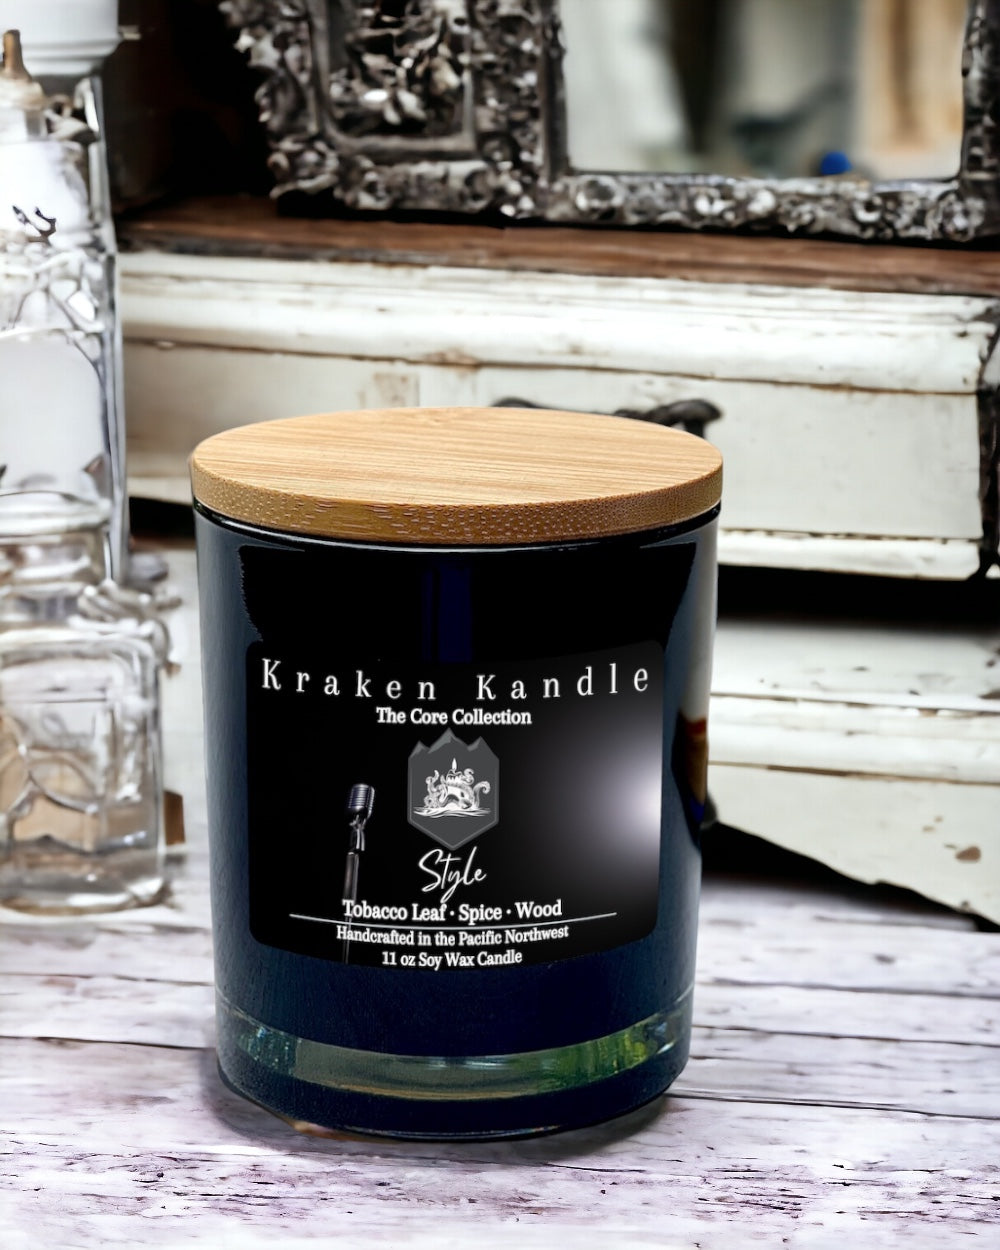 Tobacco leaf spice vanilla wood scented candle inspired by Harry Styles